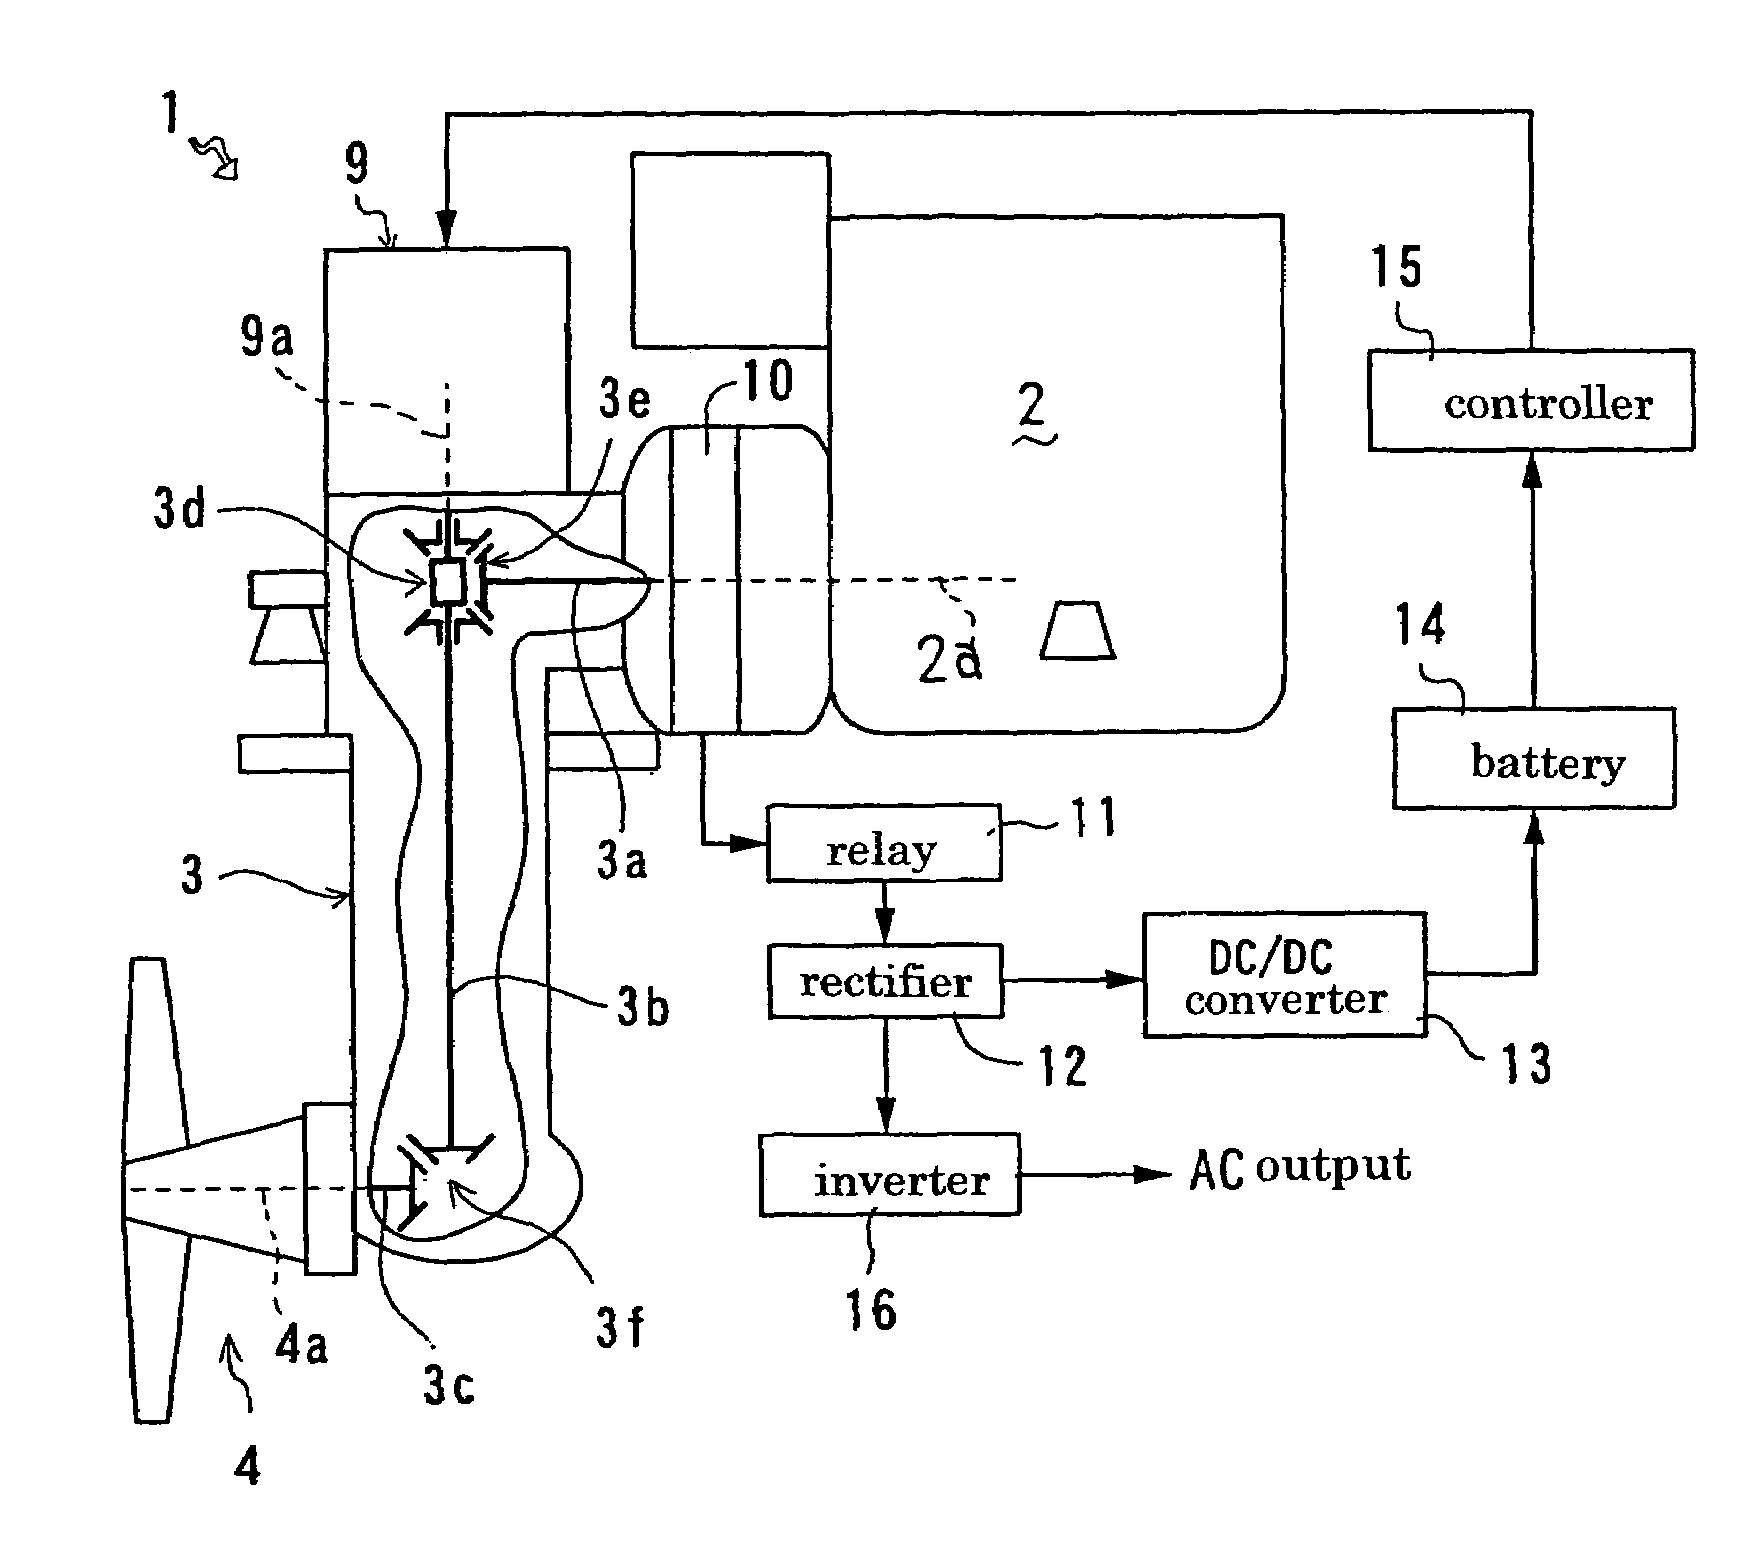 Power generating and propelling system of vessel